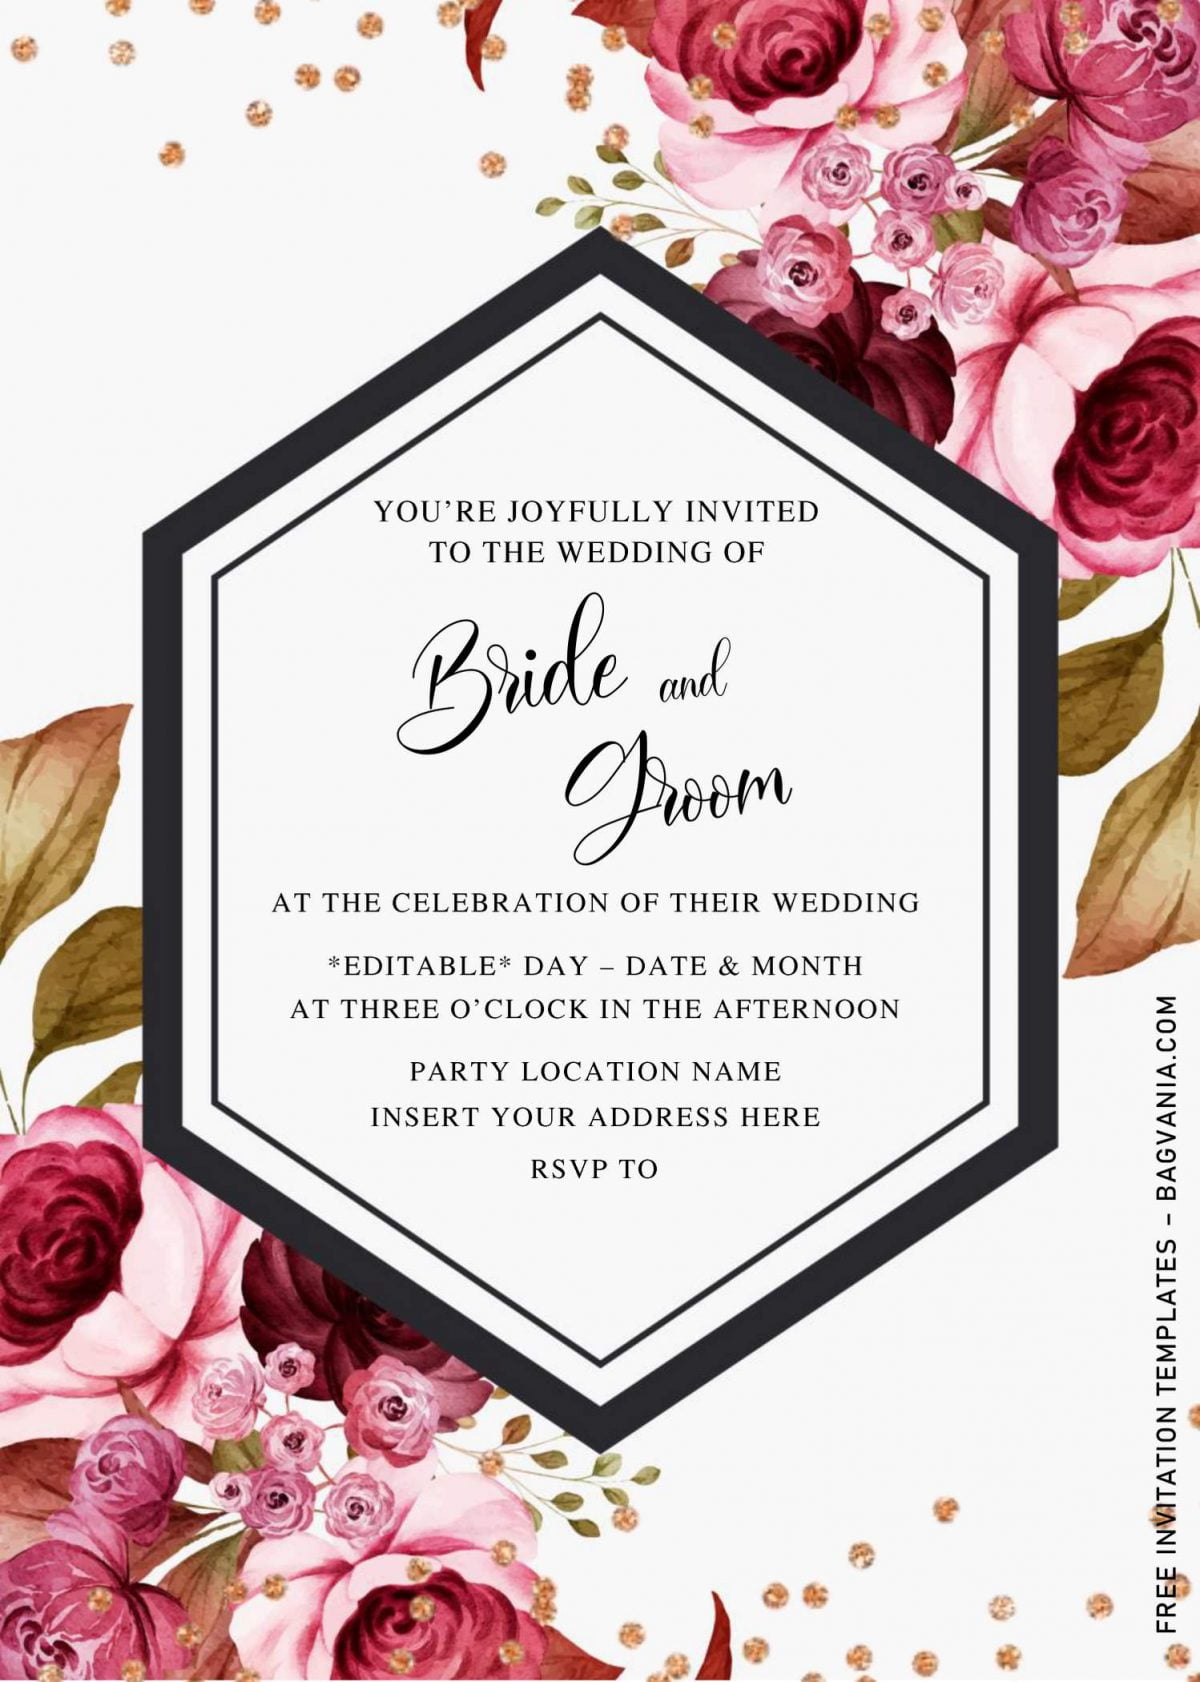 Free Burgundy Floral Wedding Invitation Templates For Word and has portrait orientation